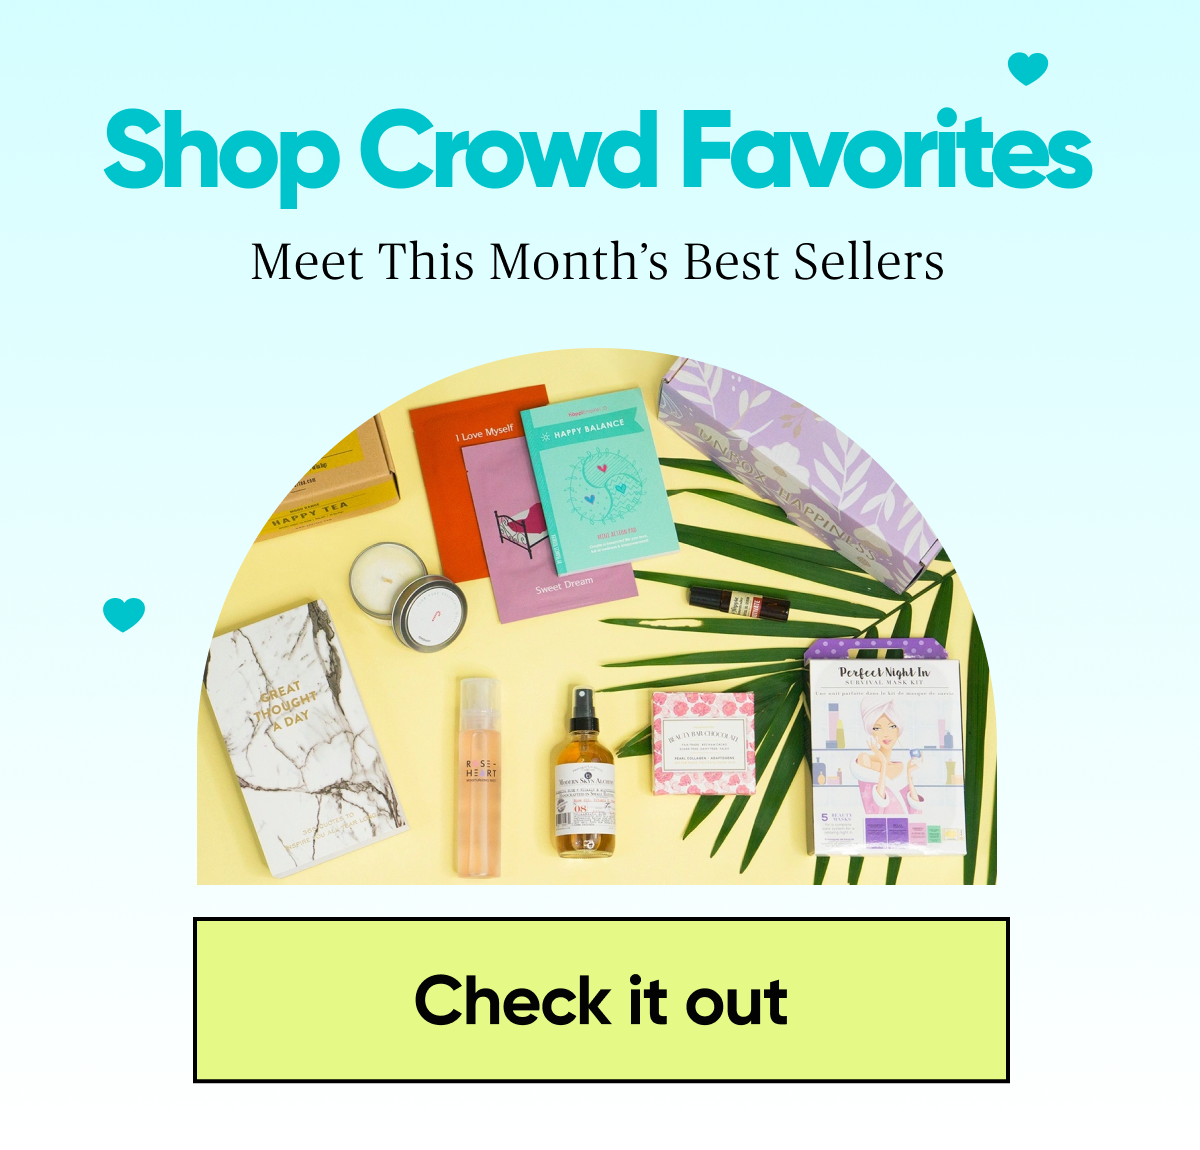 Shop Crowd Favorites Meet This Months Best Sellers Check it out